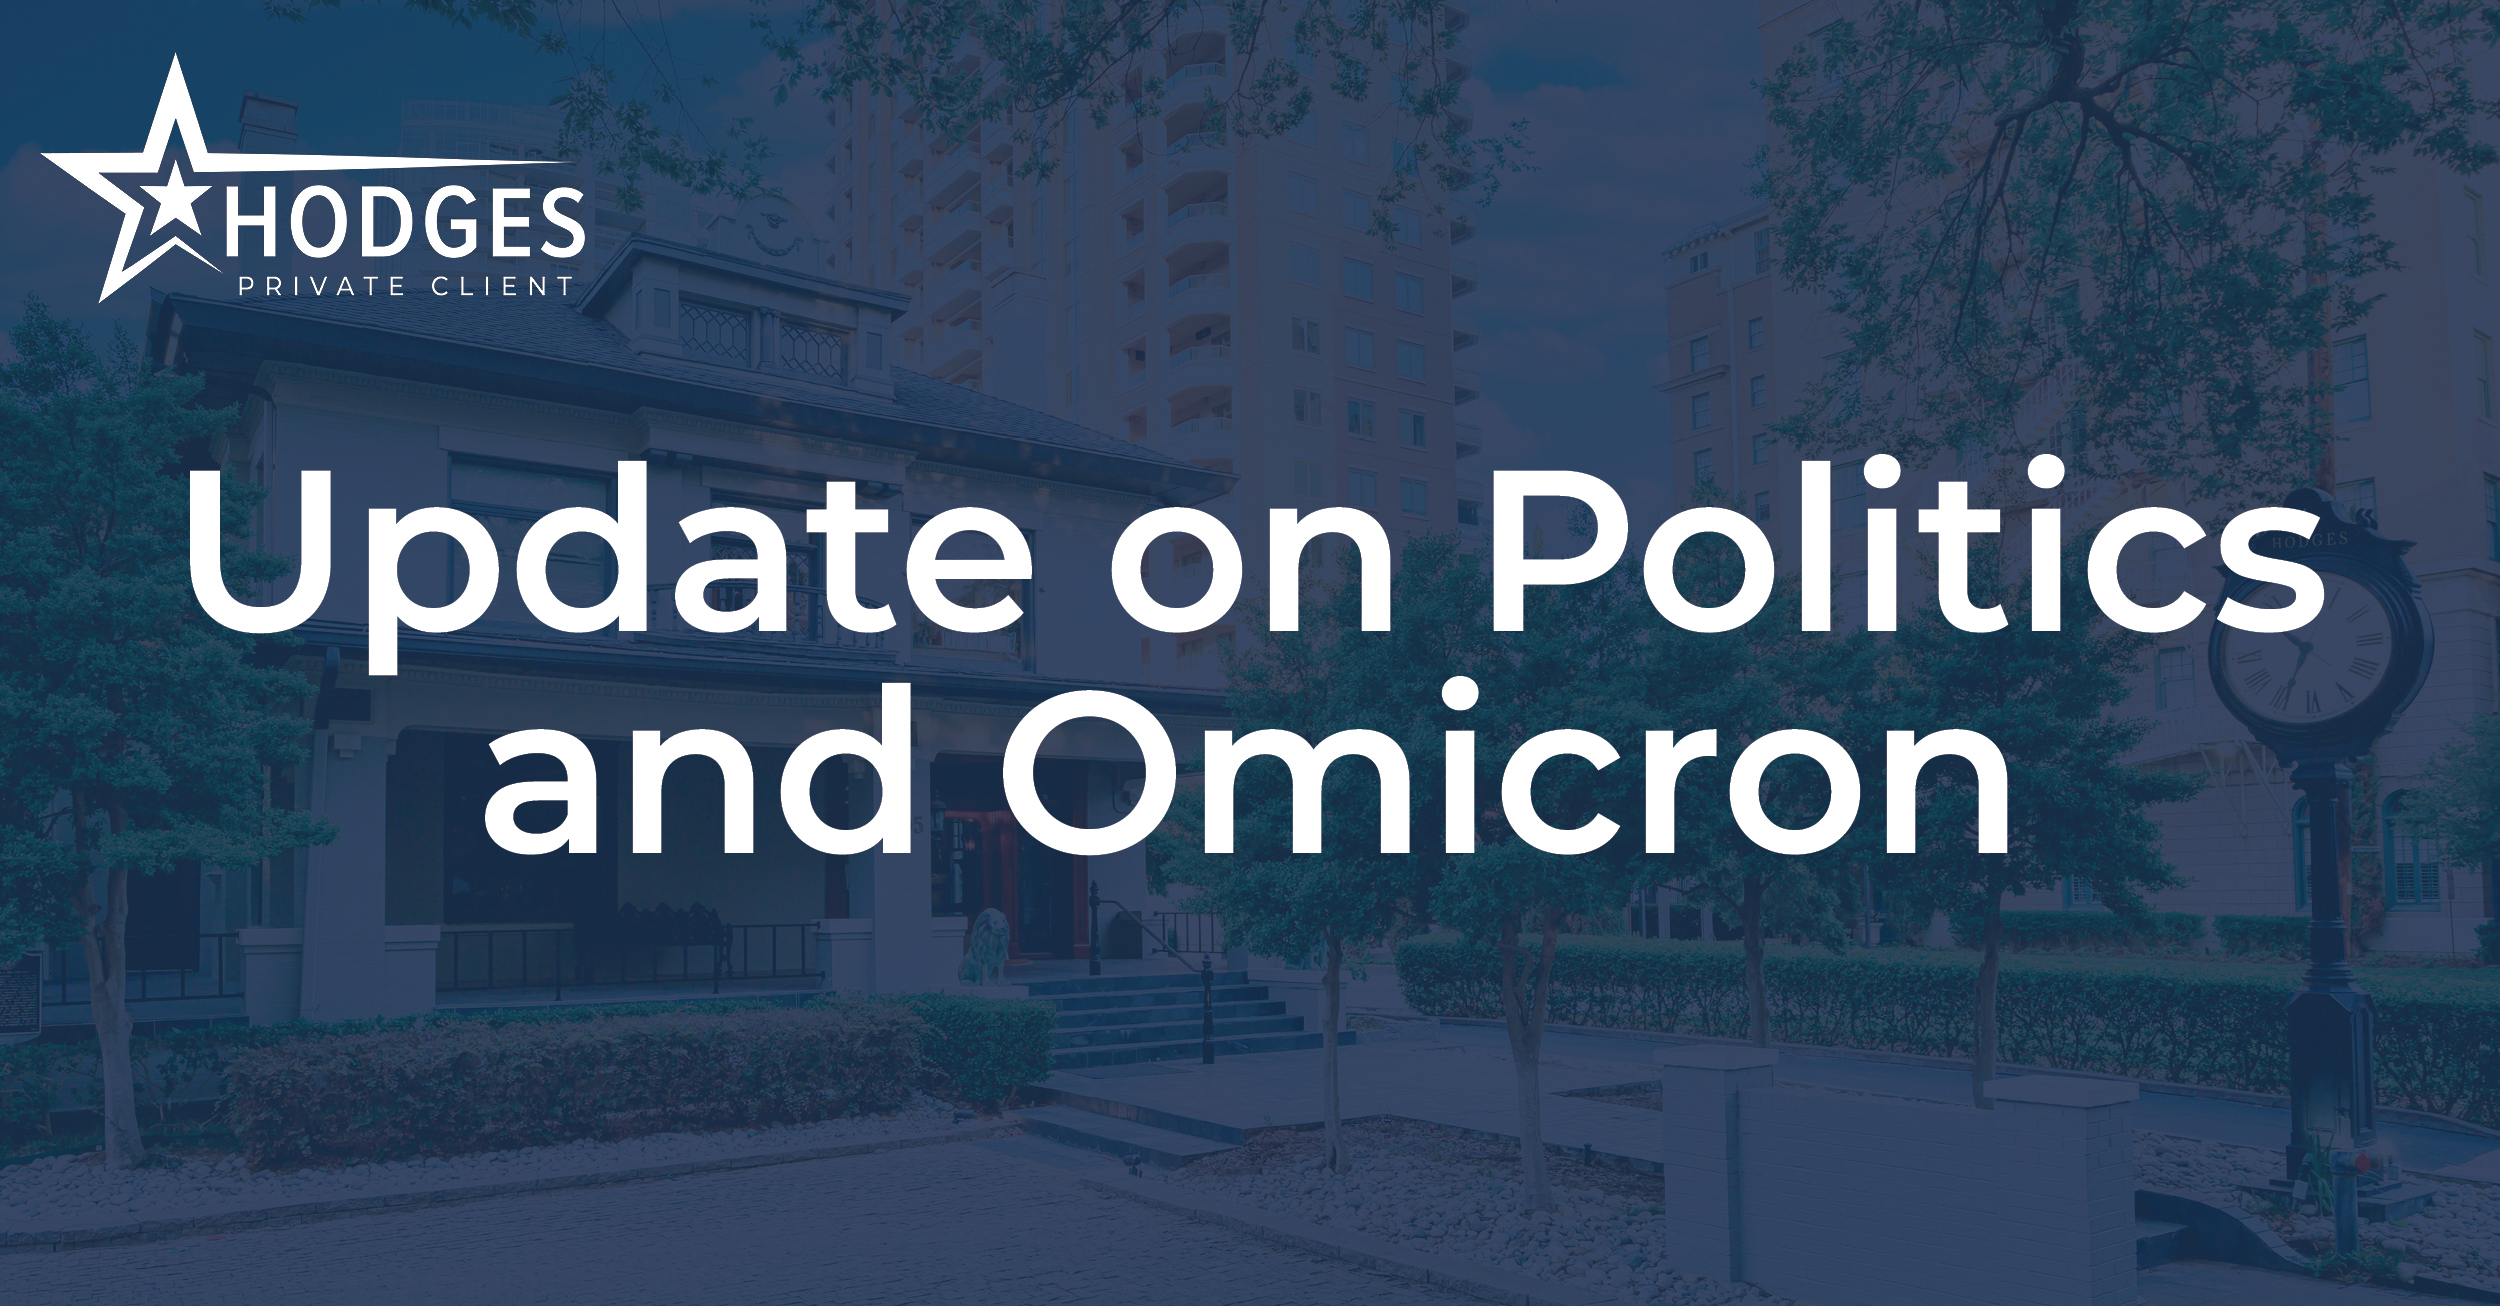 Update on Politics and Omicron